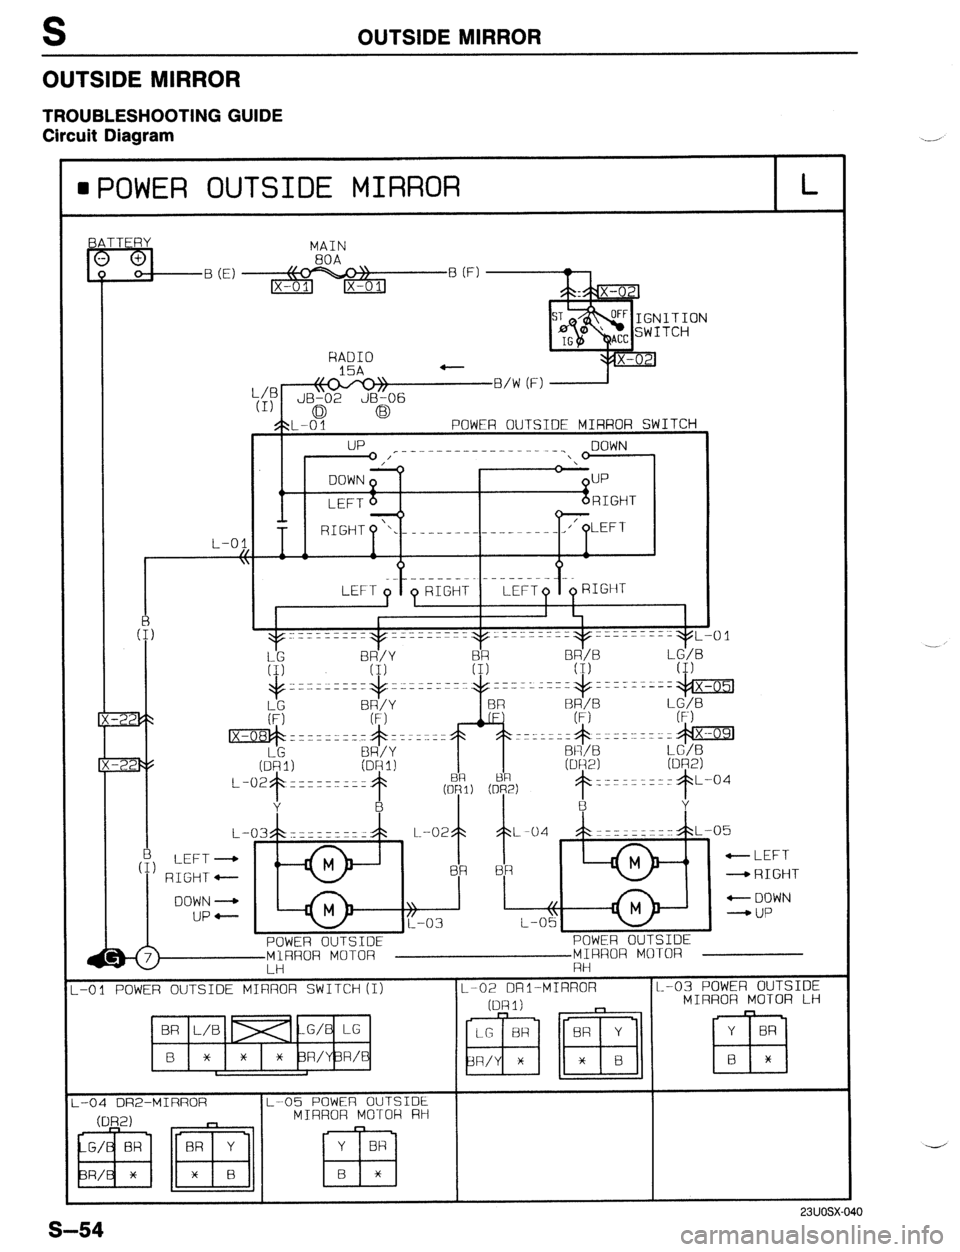 MAZDA PROTEGE 1992  Workshop Manual S 
OUTSIDE MIRROR 
TROUBLESHOOTING GUIDE 
Circuit Diagram 
OUTSIDE MIRROR 
IPOWER OUTSIDE MIRROR L 
BATTERY 
MAIN 
80A 
B (E) B (F) 
ITION 
TCH 
HAD10 
15A - 
::P \\o-rol/ 
JB-02 JB-06 
0 G3 
$?L-0 1 